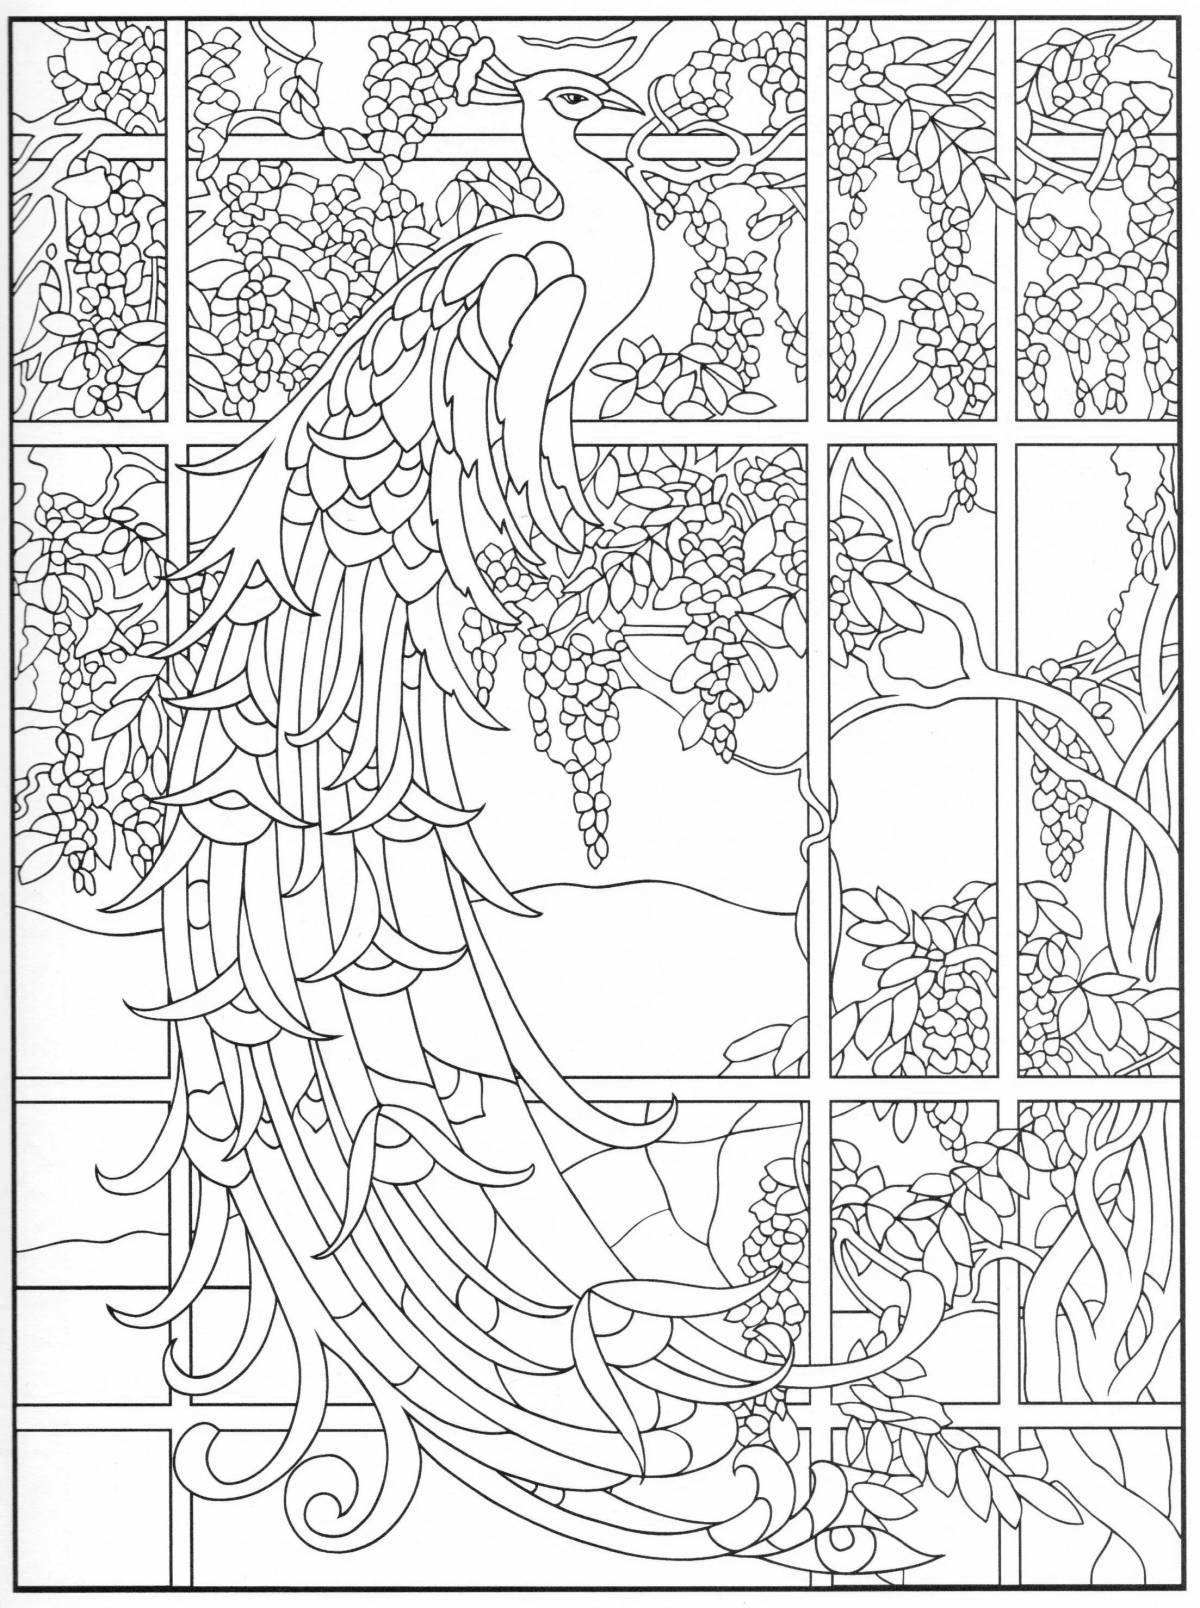 Dazzling peacock coloring by numbers